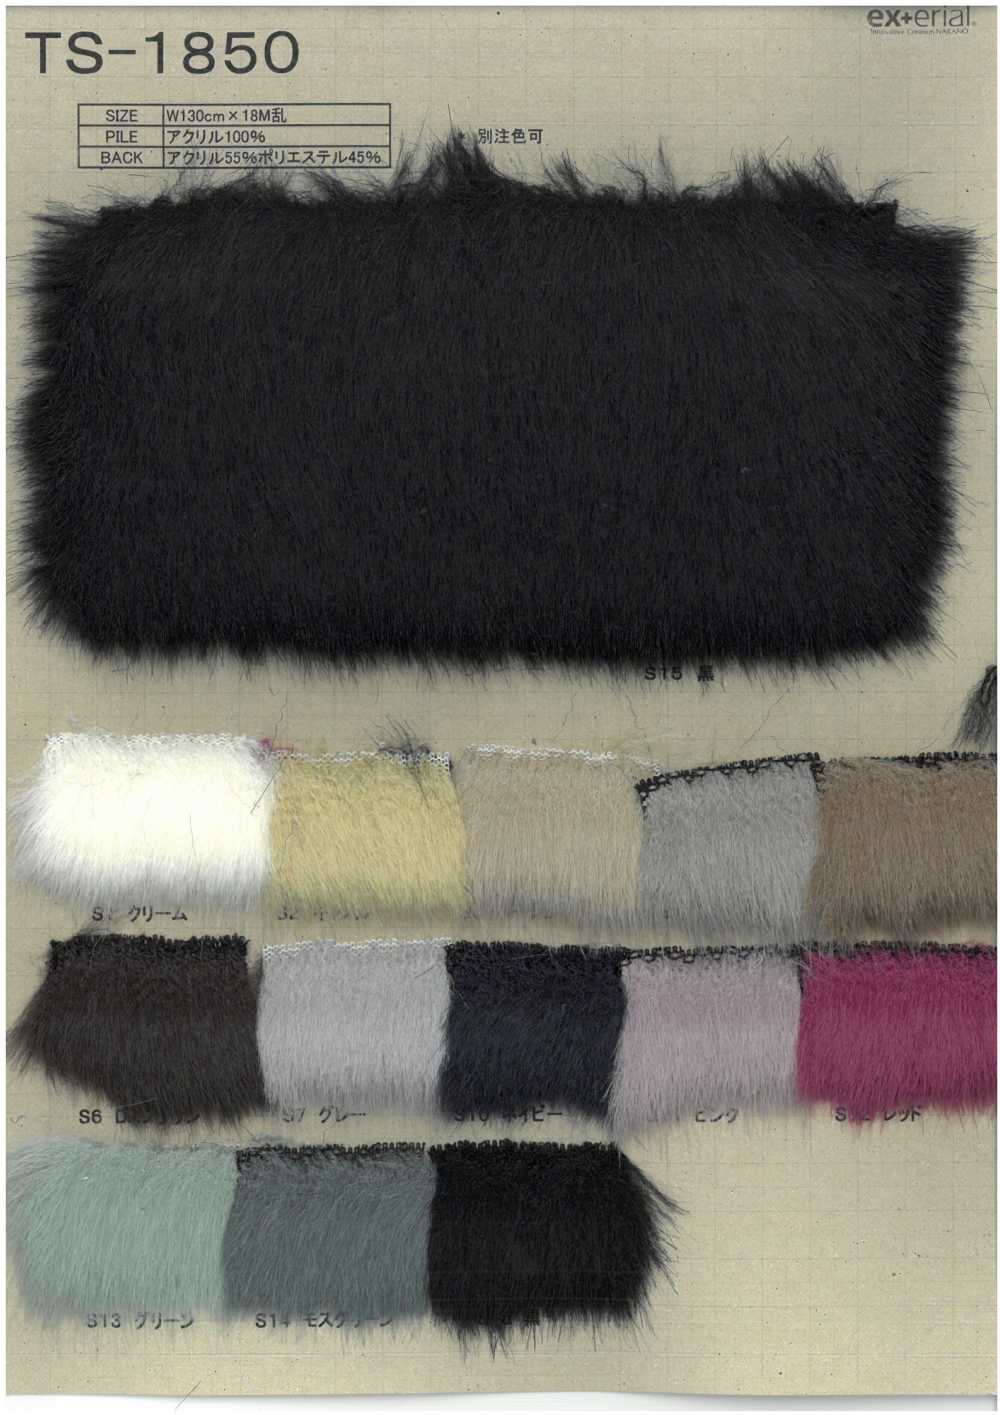 TS-1850 Craft Fur [mink][Textile / Fabric] Nakano Stockinette Industry